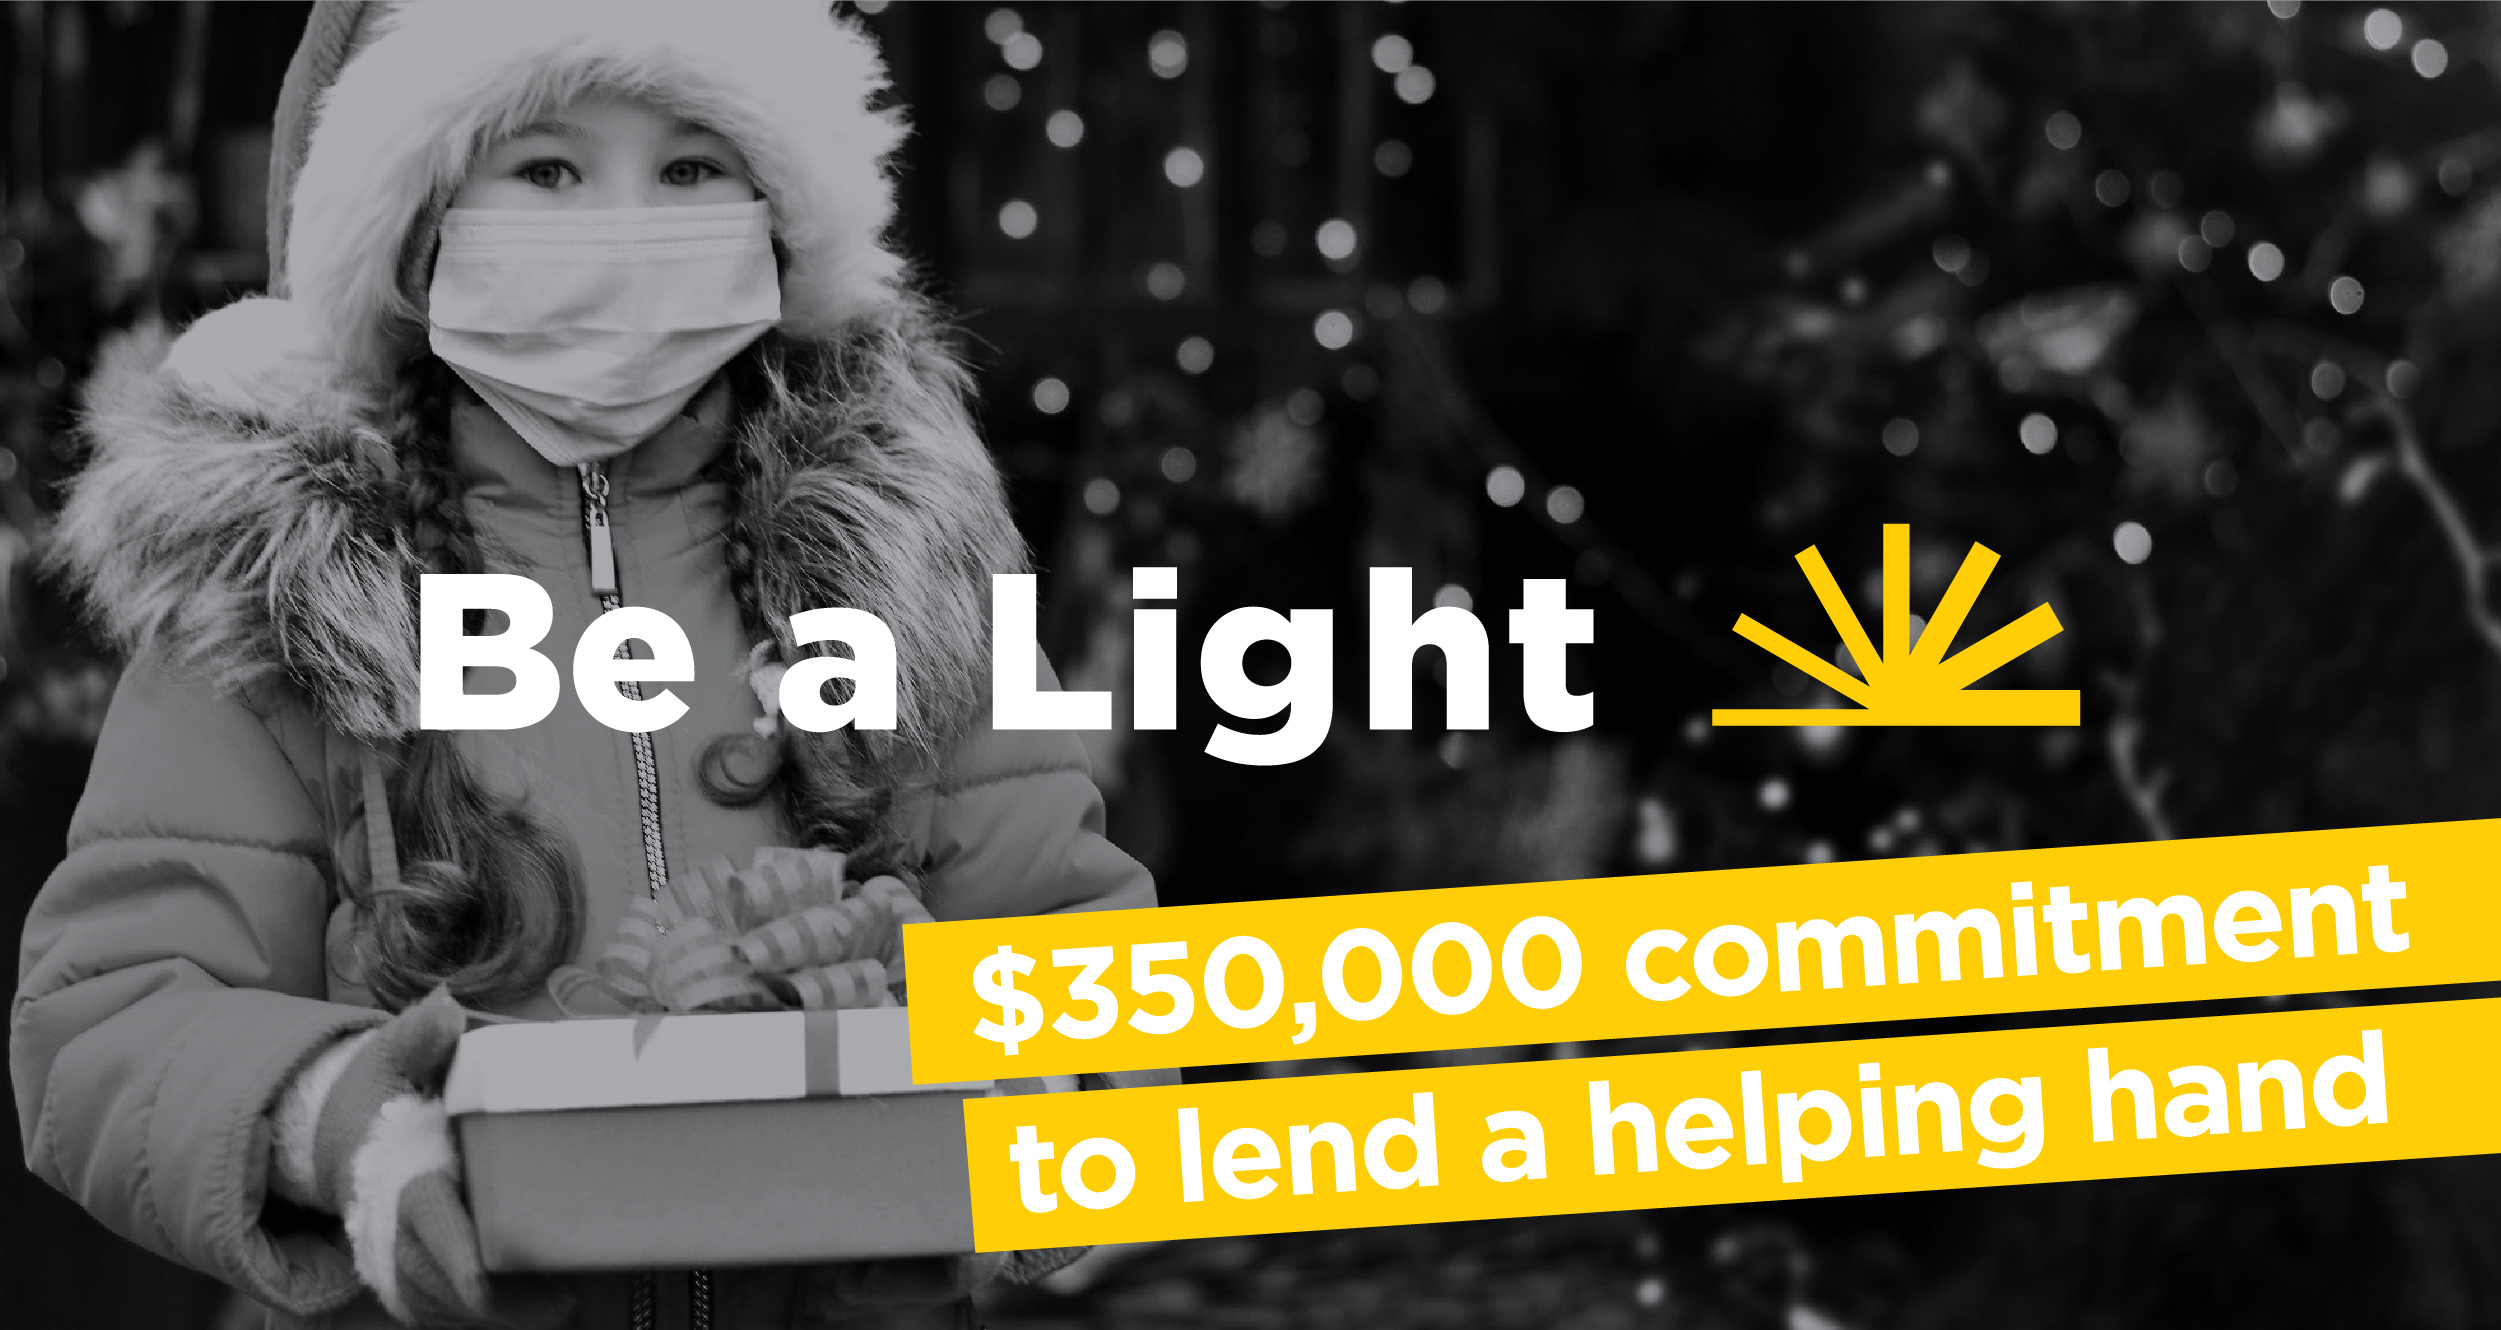 Advertisement announcing $350,000 donation Be a Light campaign